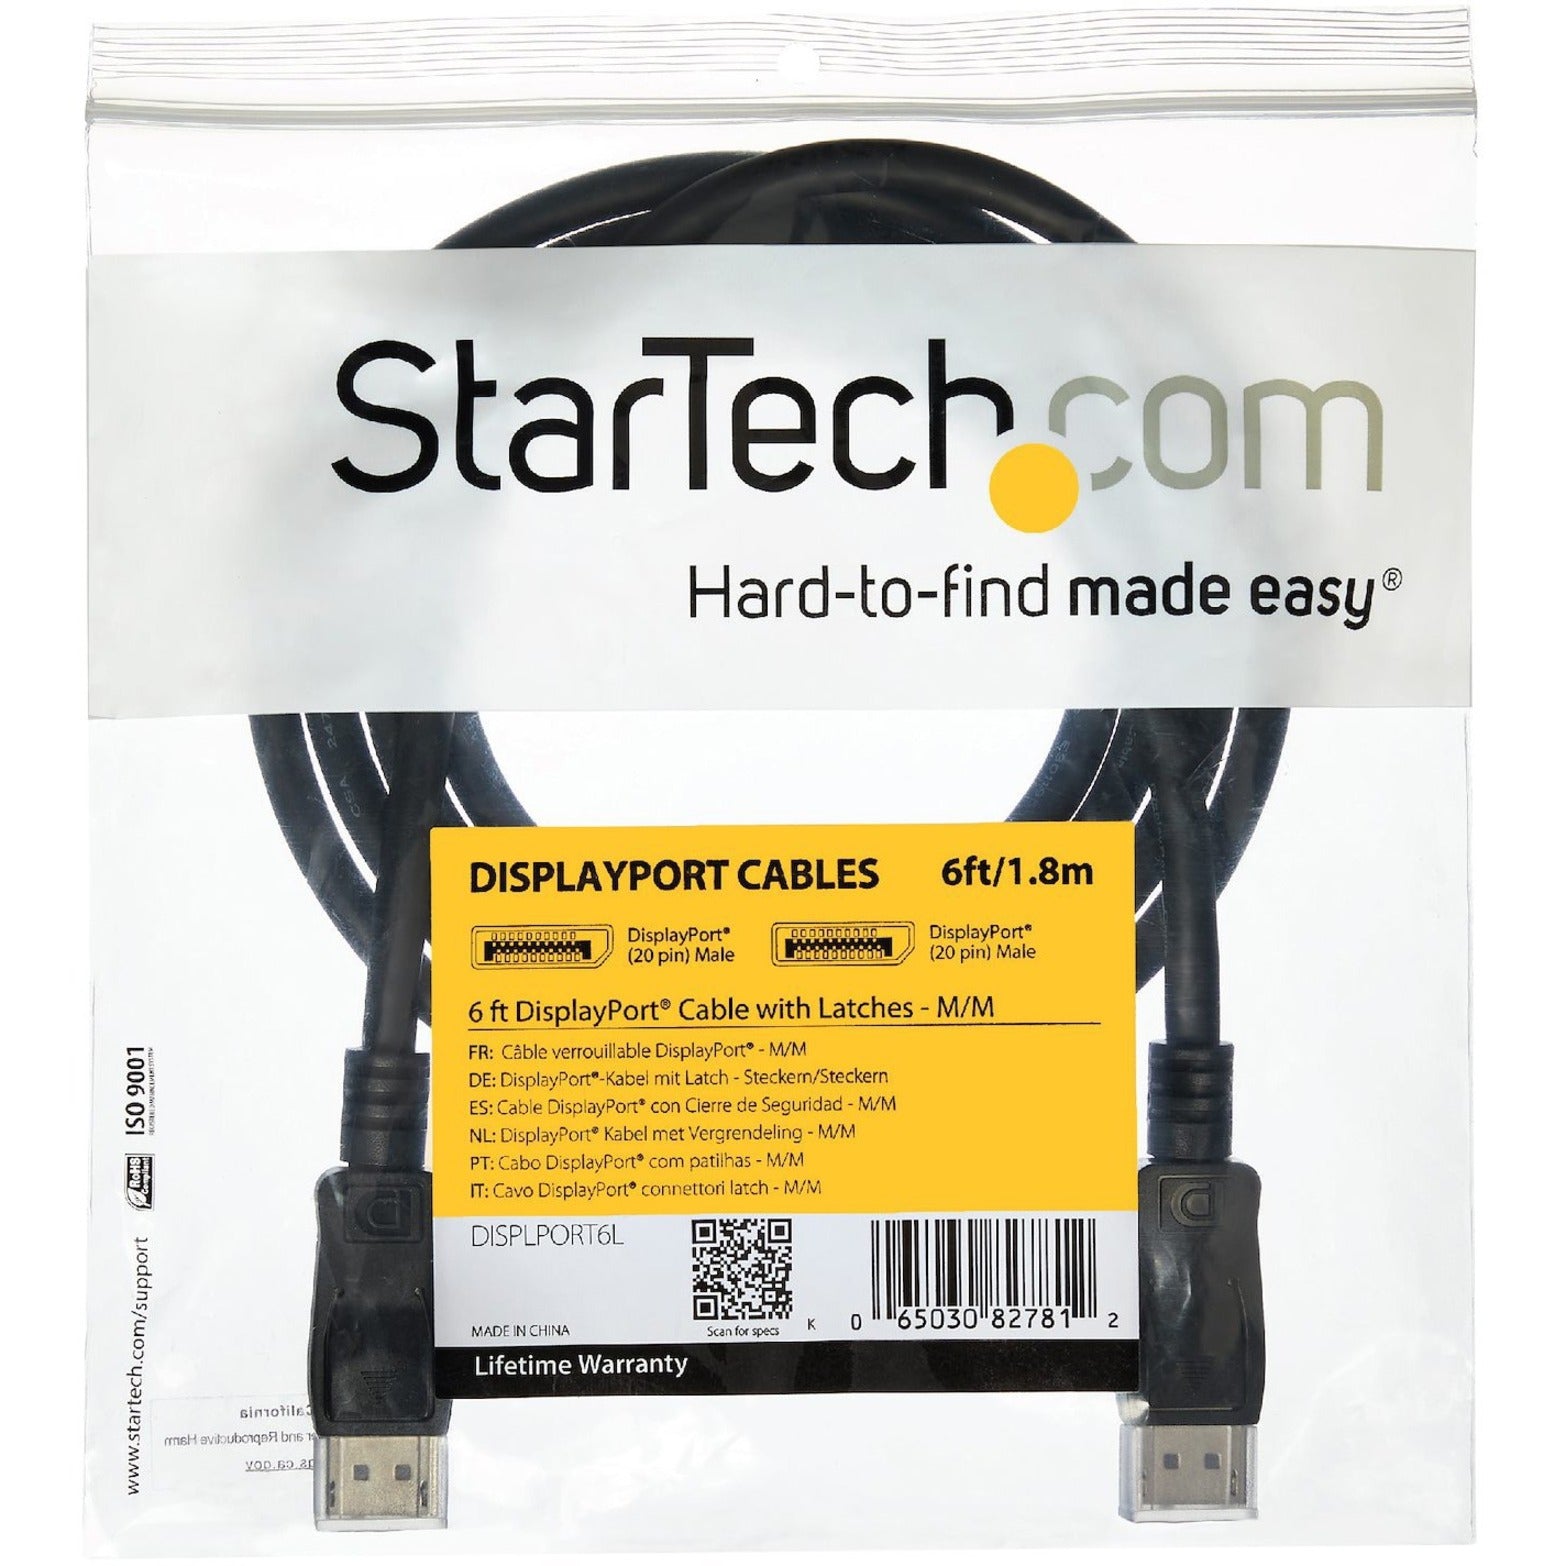 StarTech.com DISPLPORT35L 35 ft DisplayPort Cable with Latches - M/M, High-Speed Video Cable for Graphics Card, Projector, Monitor